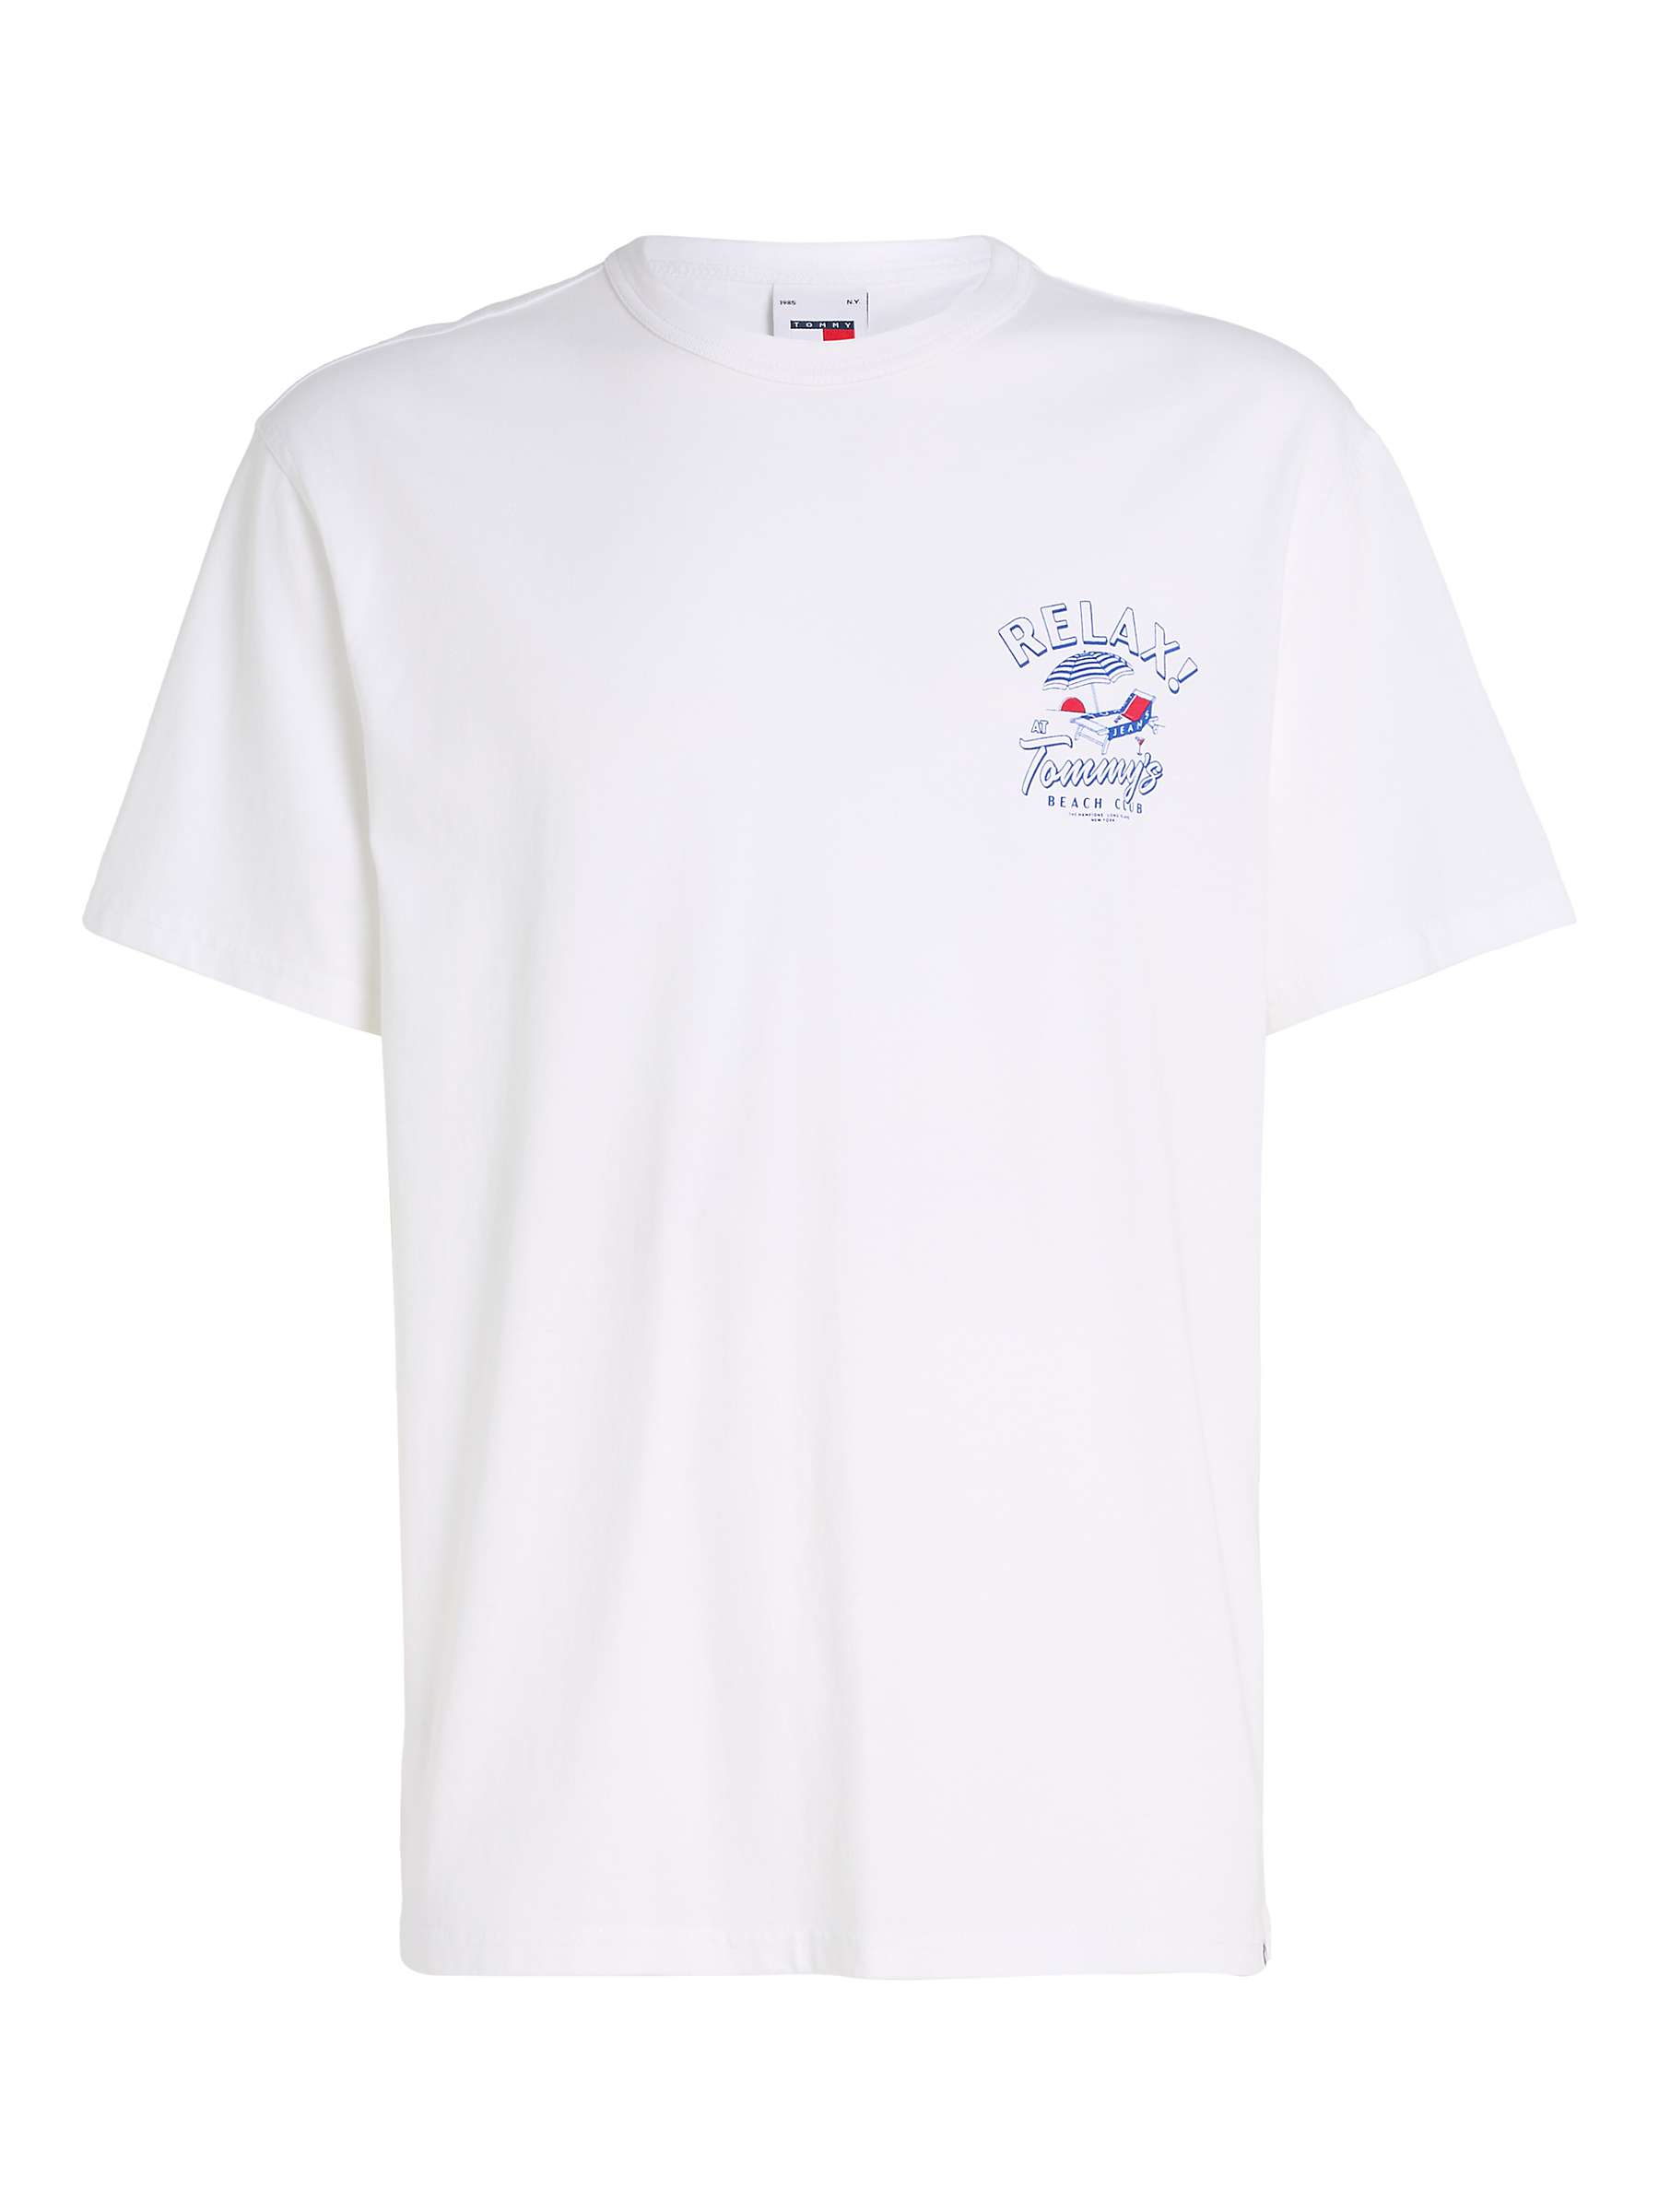 Buy Tommy Hilfiger Graphic Short Sleeve T-Shirt, White Online at johnlewis.com